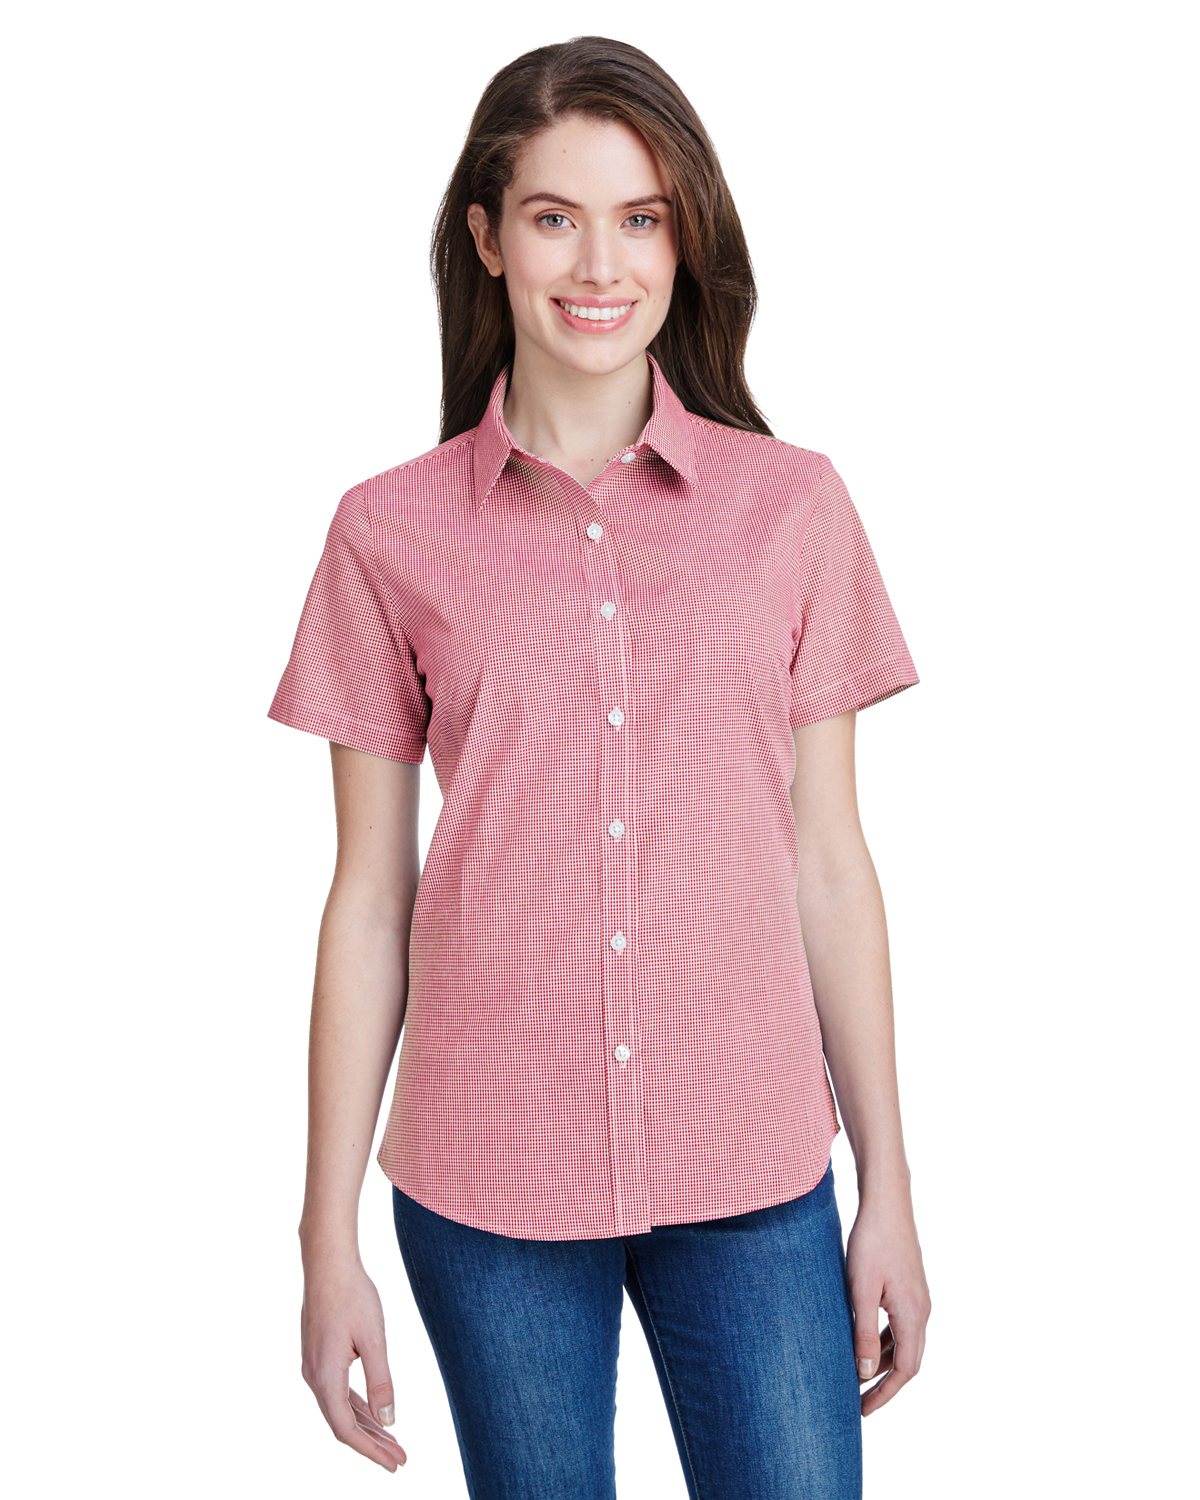 RP321 Artisan Collection by Reprime Ladies\' Microcheck Gingham Short-Sleeve Cotton Shirt